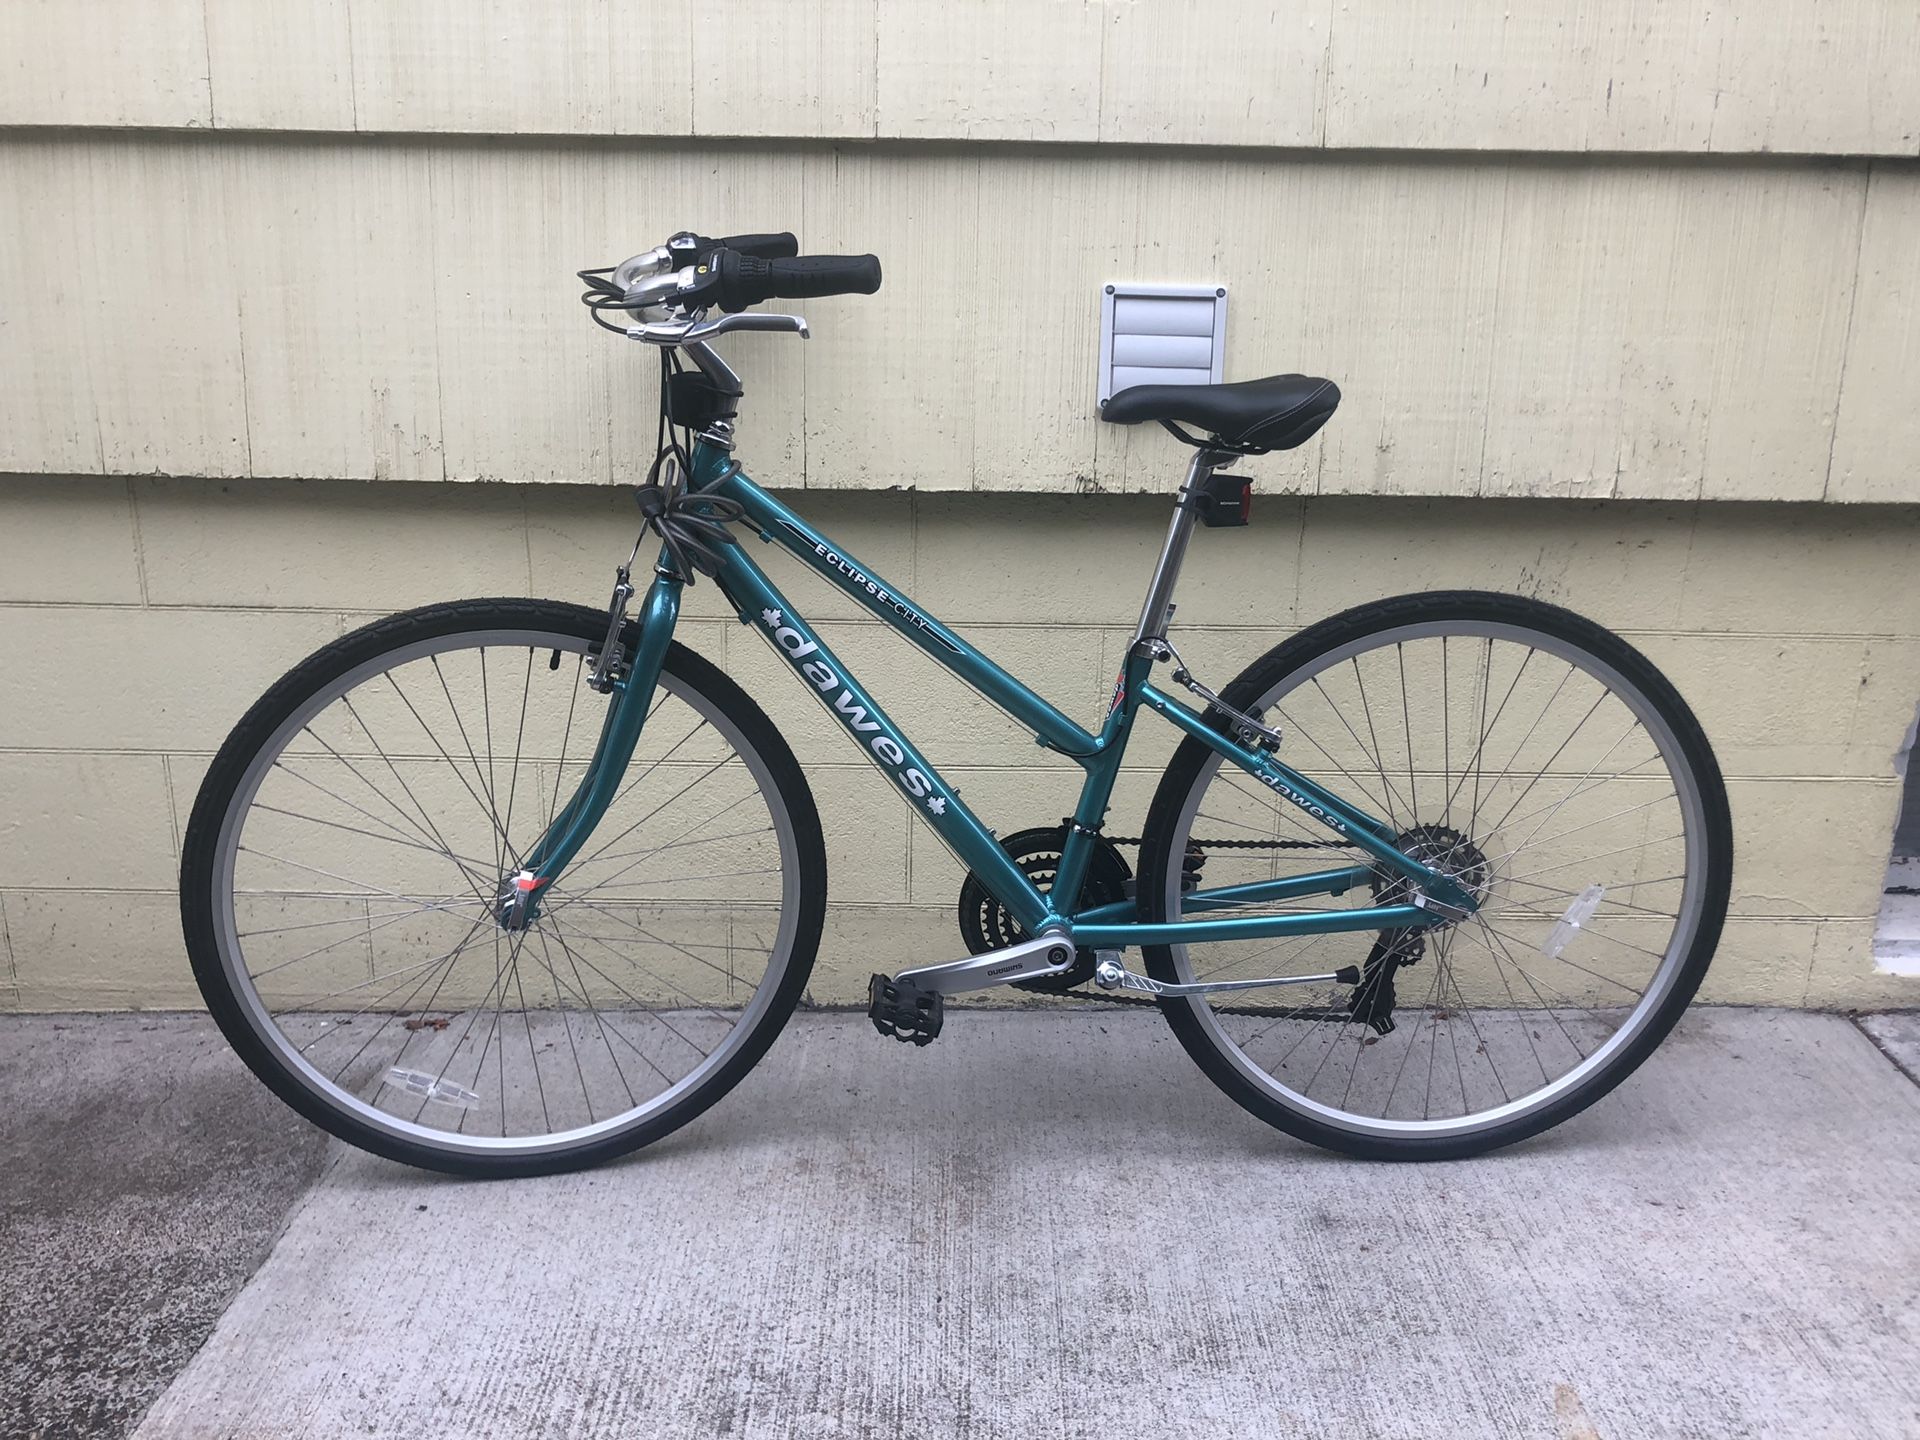 S-M sized women’s bike. Great condition!